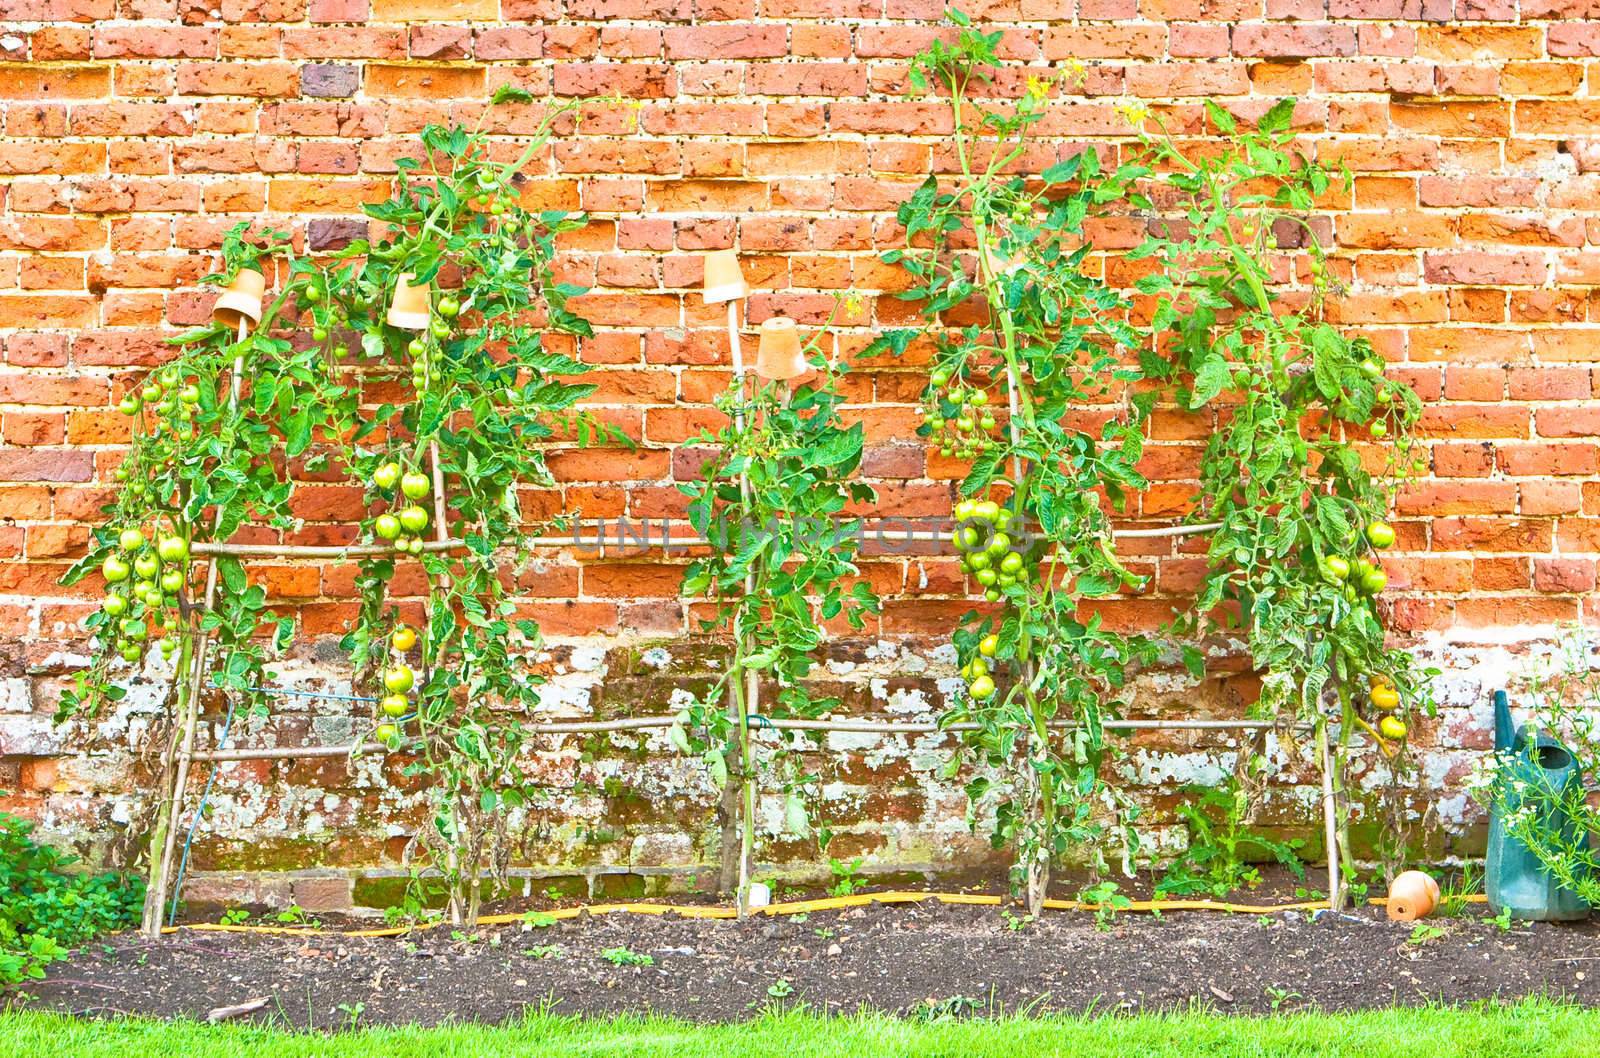 Tomato plants growing in an allotment against a brick wall